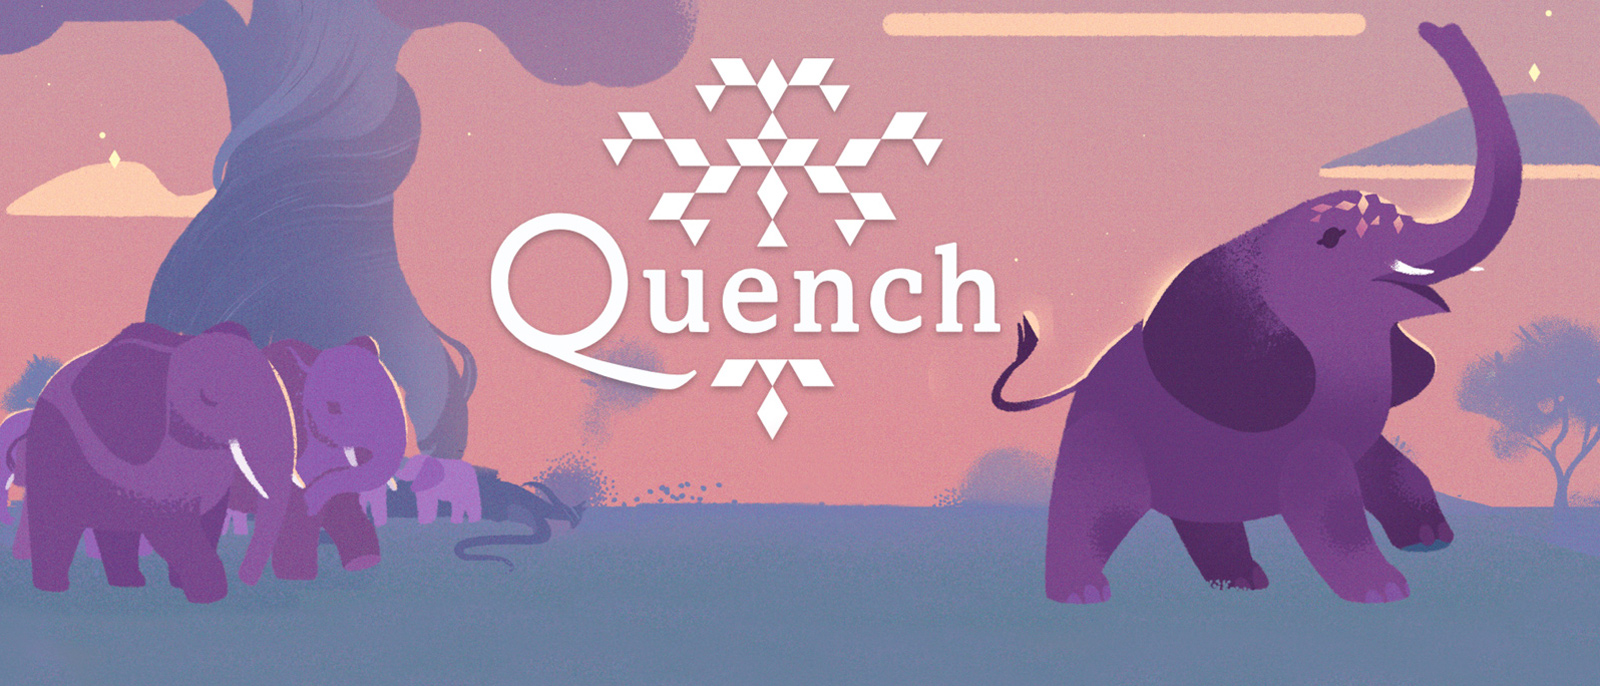 Quench Artbook & Guide (Free Preview!)